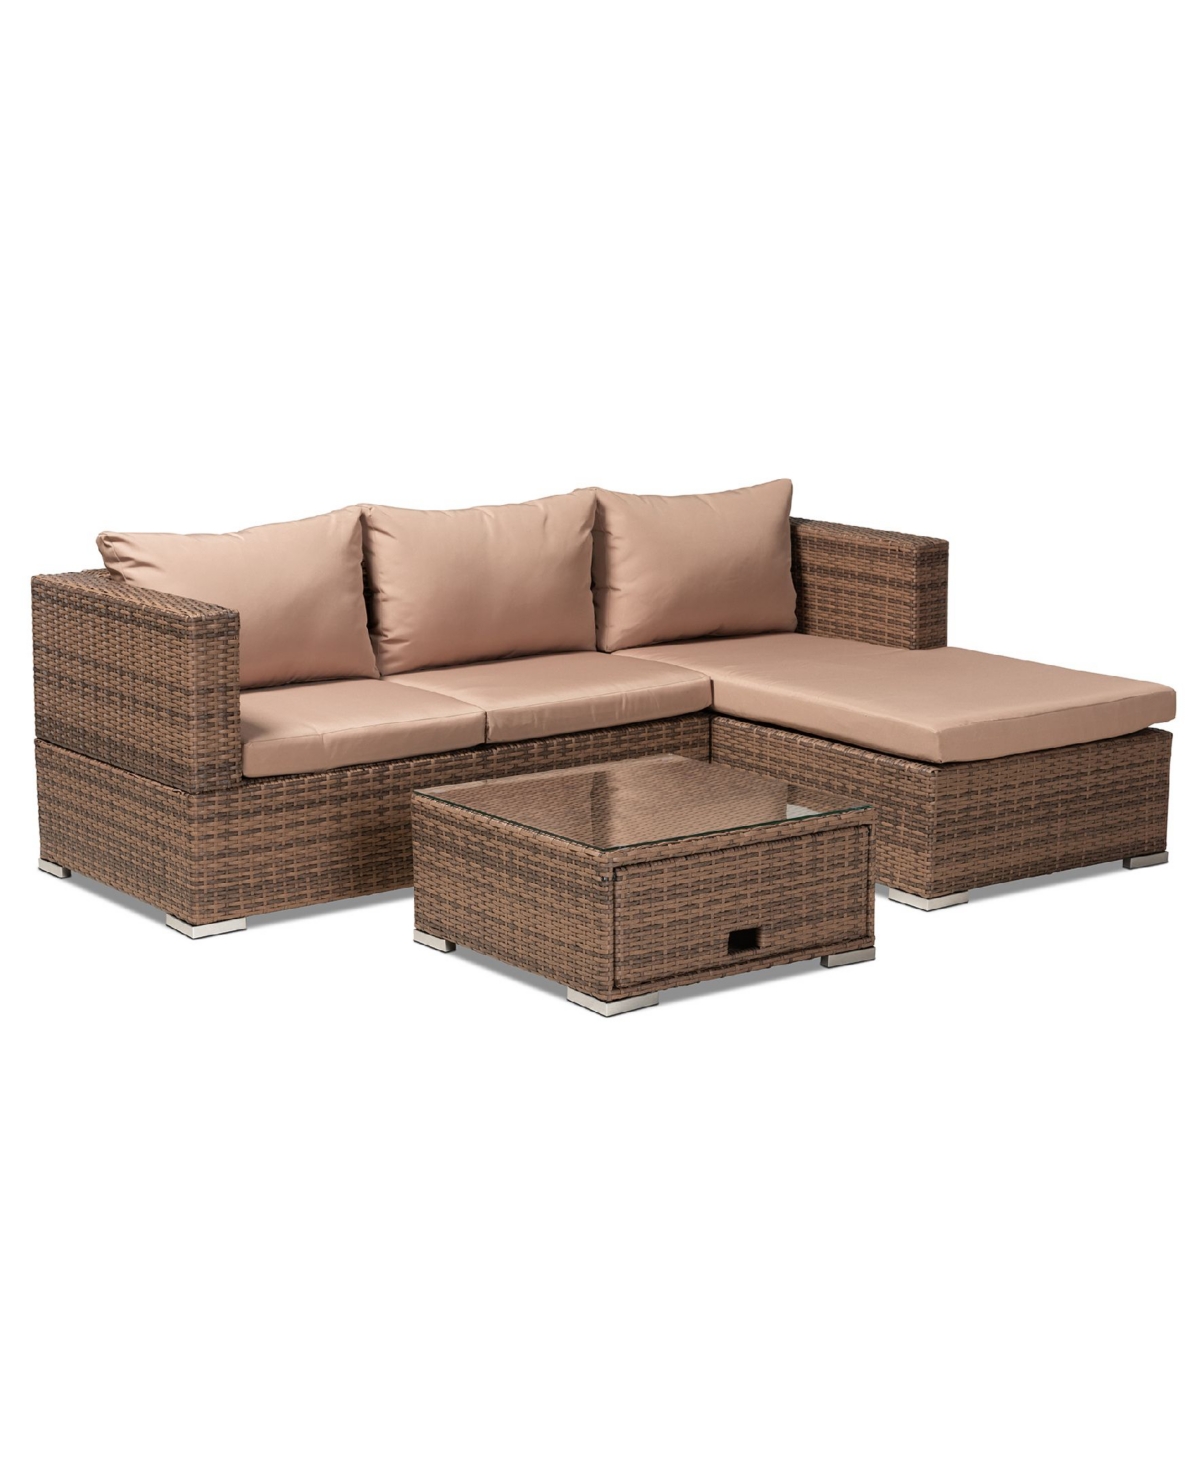 Addison Modern and Contemporary Upholstered 3 Piece Woven Rattan Outdoor Patio Set with Adjustable Recliner